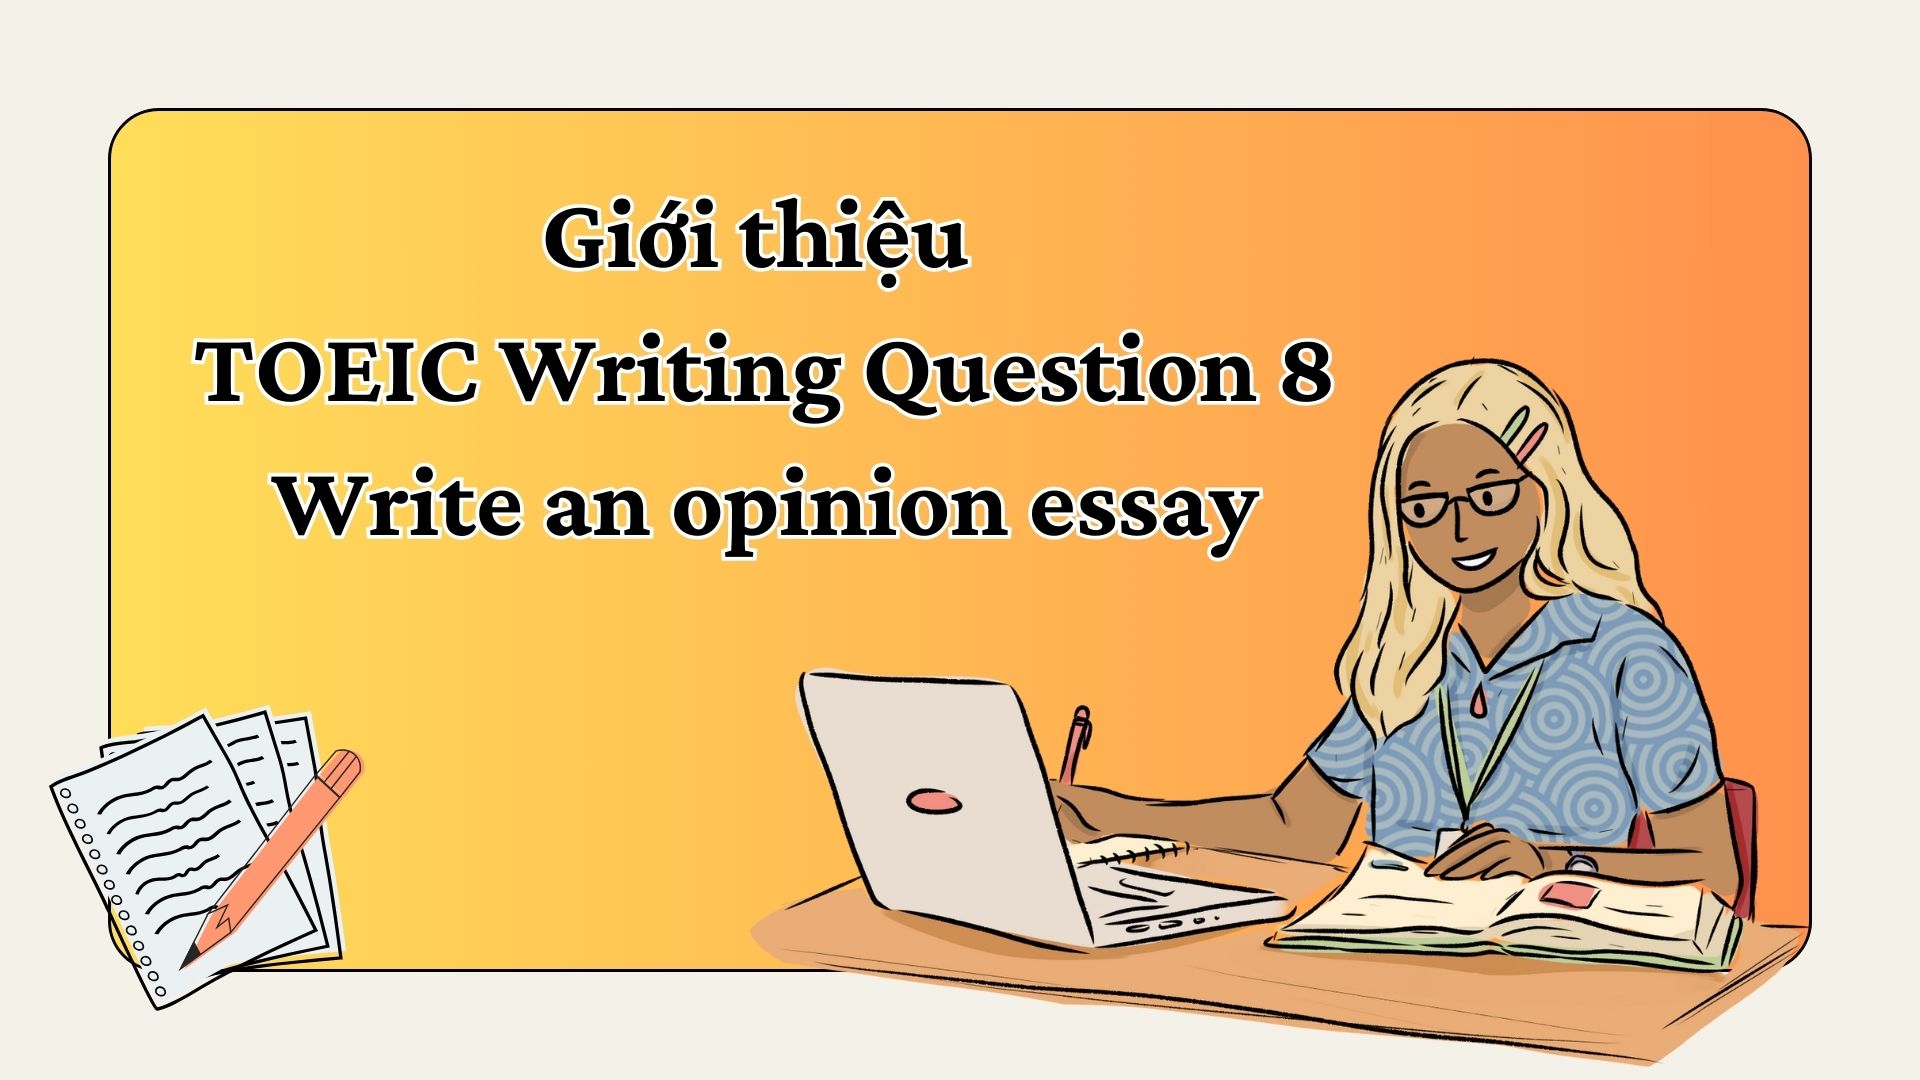 TOEIC Writing Question 8 Write an opinion essay